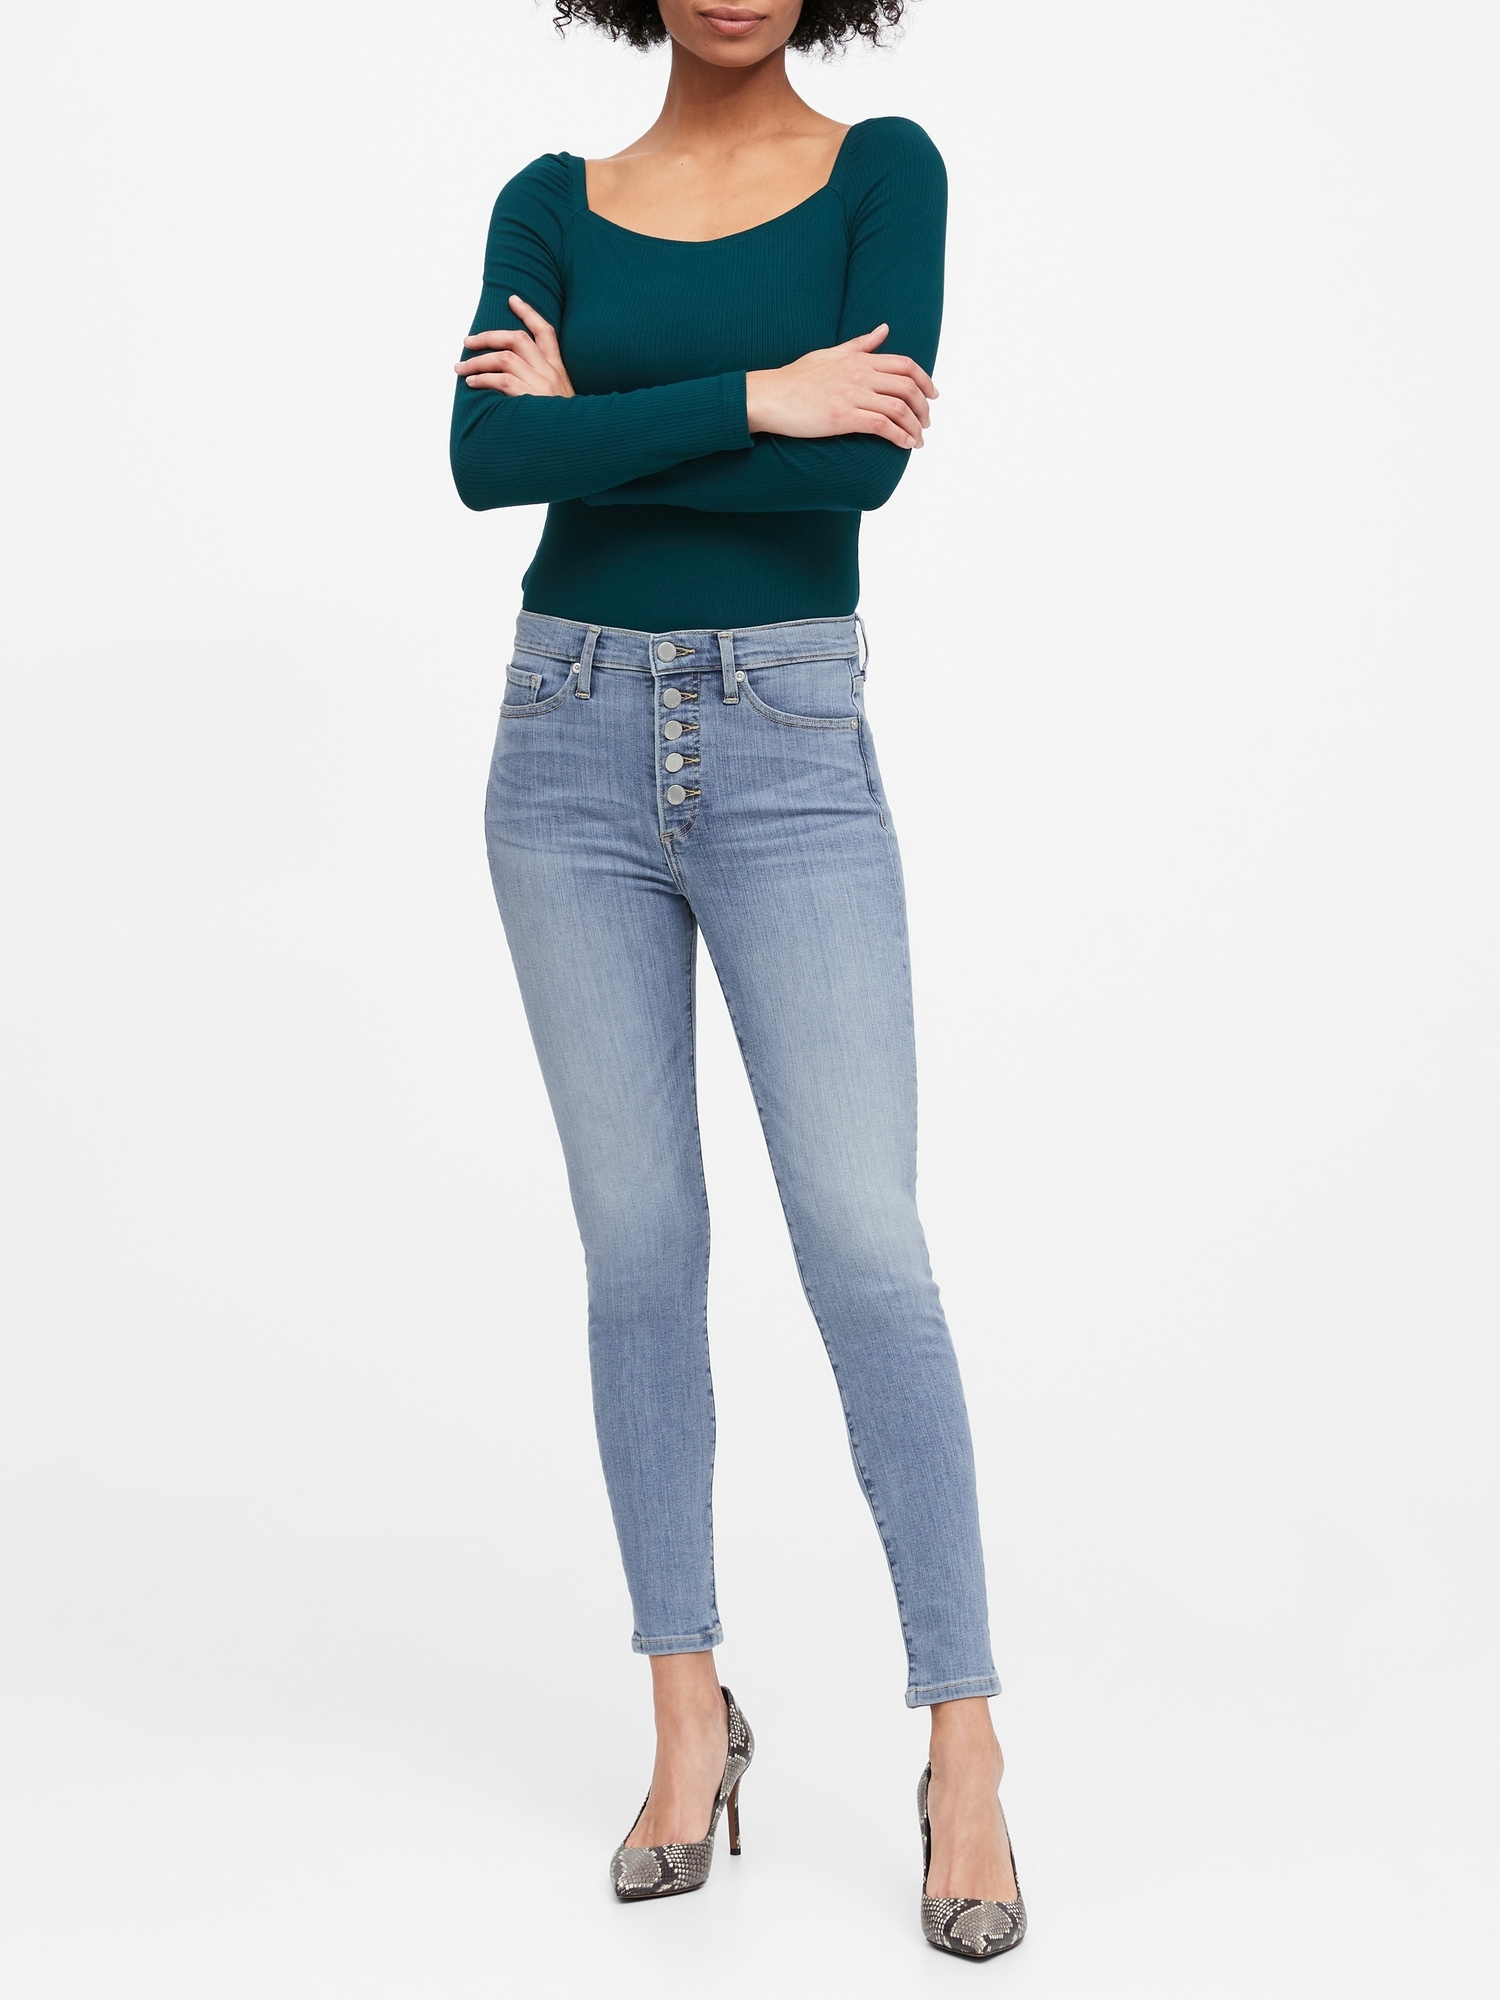 High-Rise Skinny Button-Fly Jean